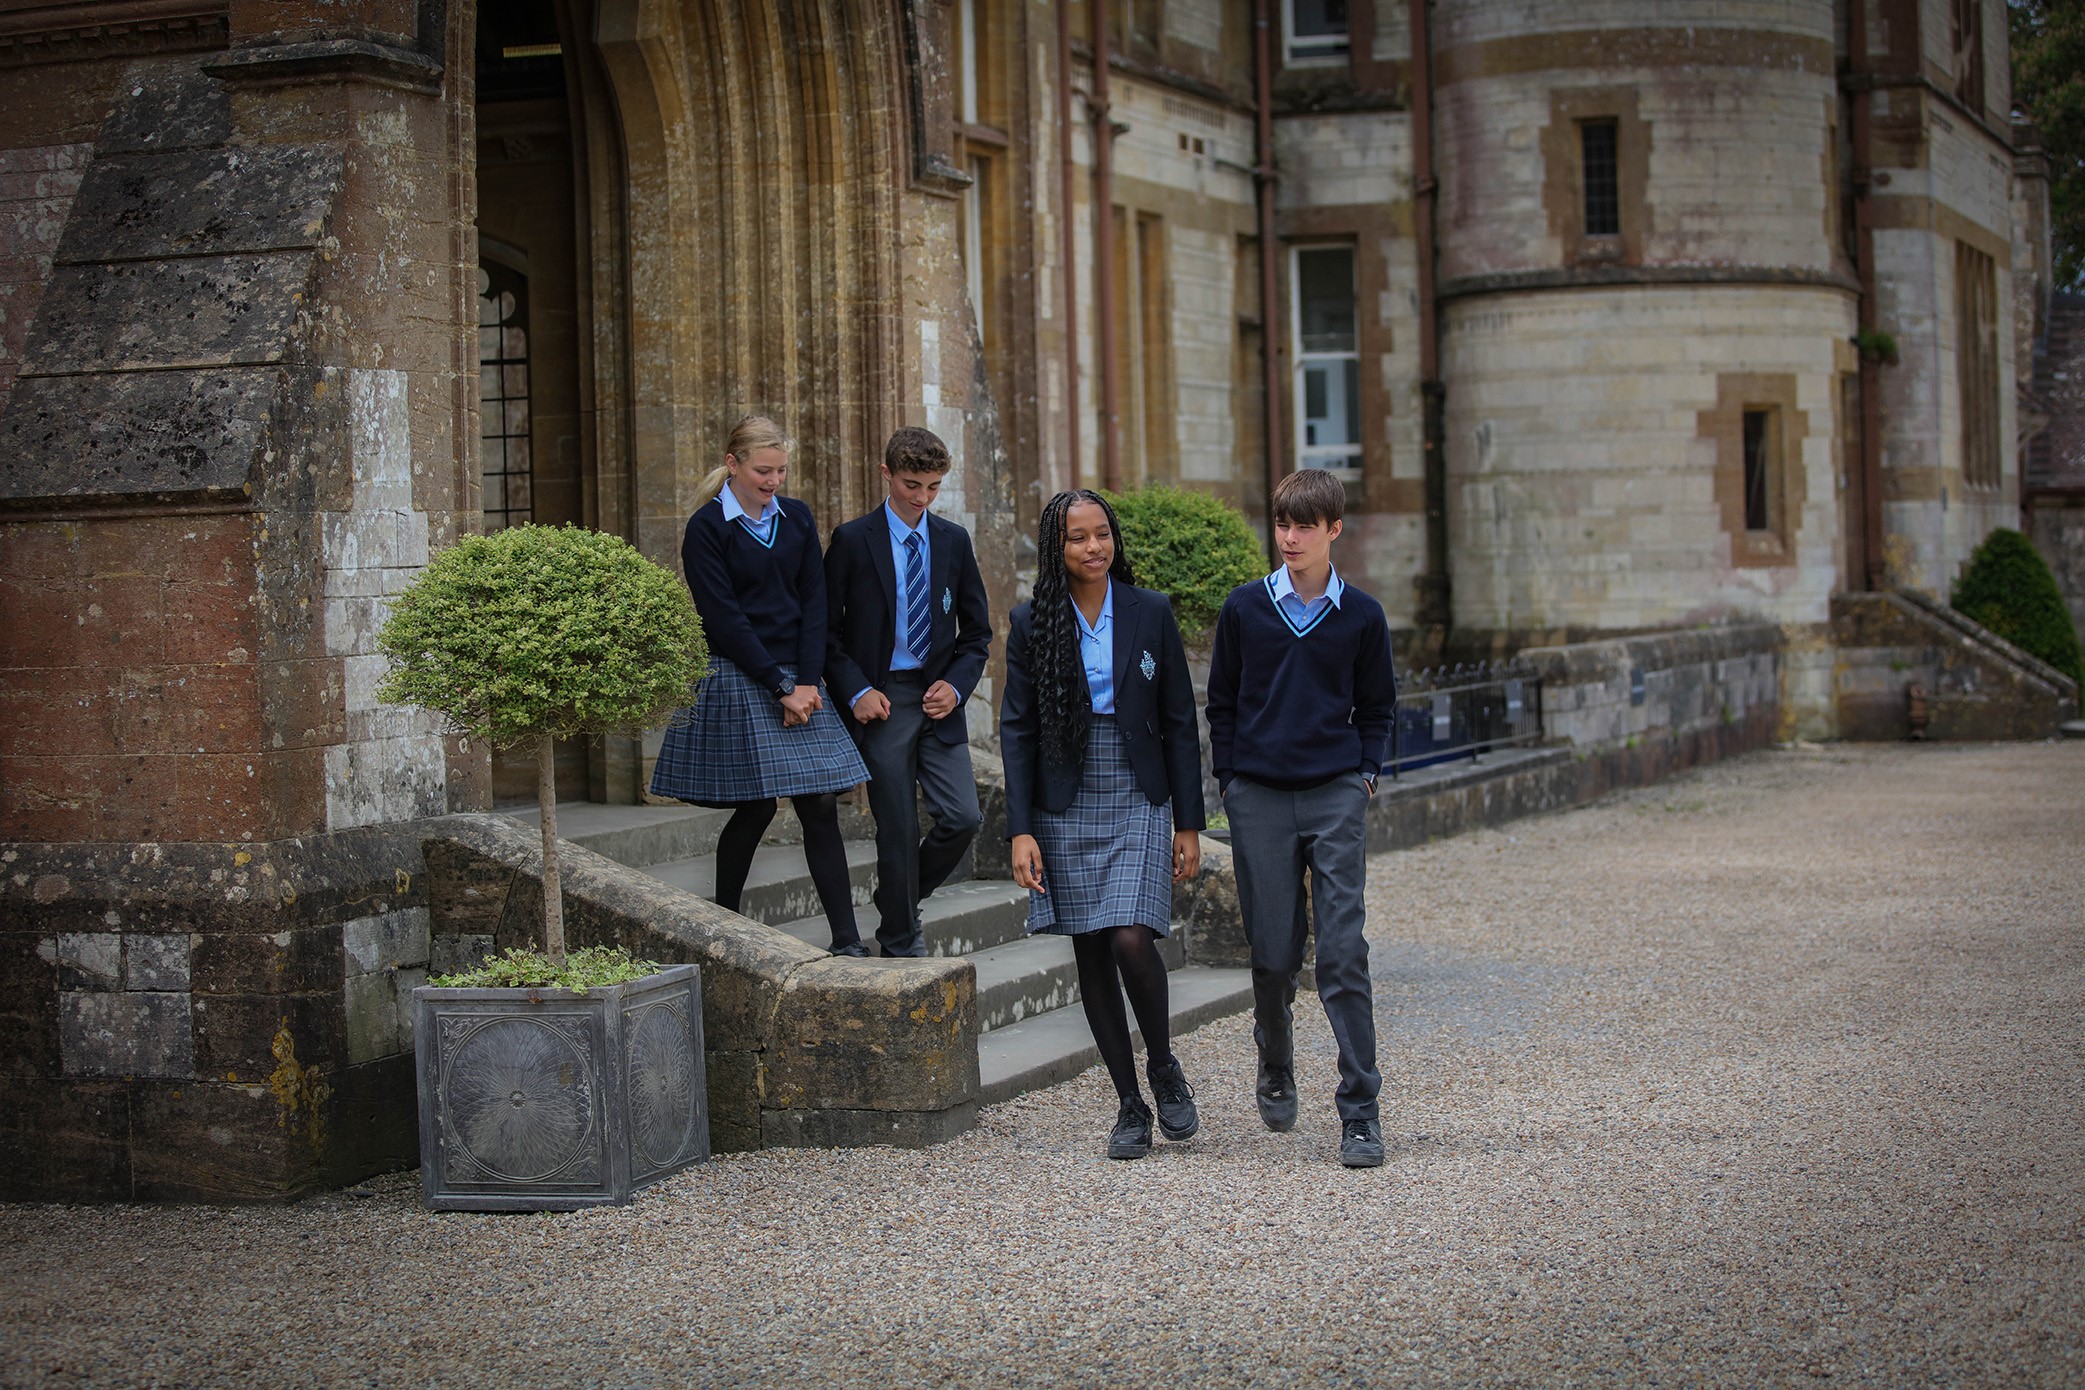 A touch of British: How thoughtful pastoral care produces happy and well-adjusted students